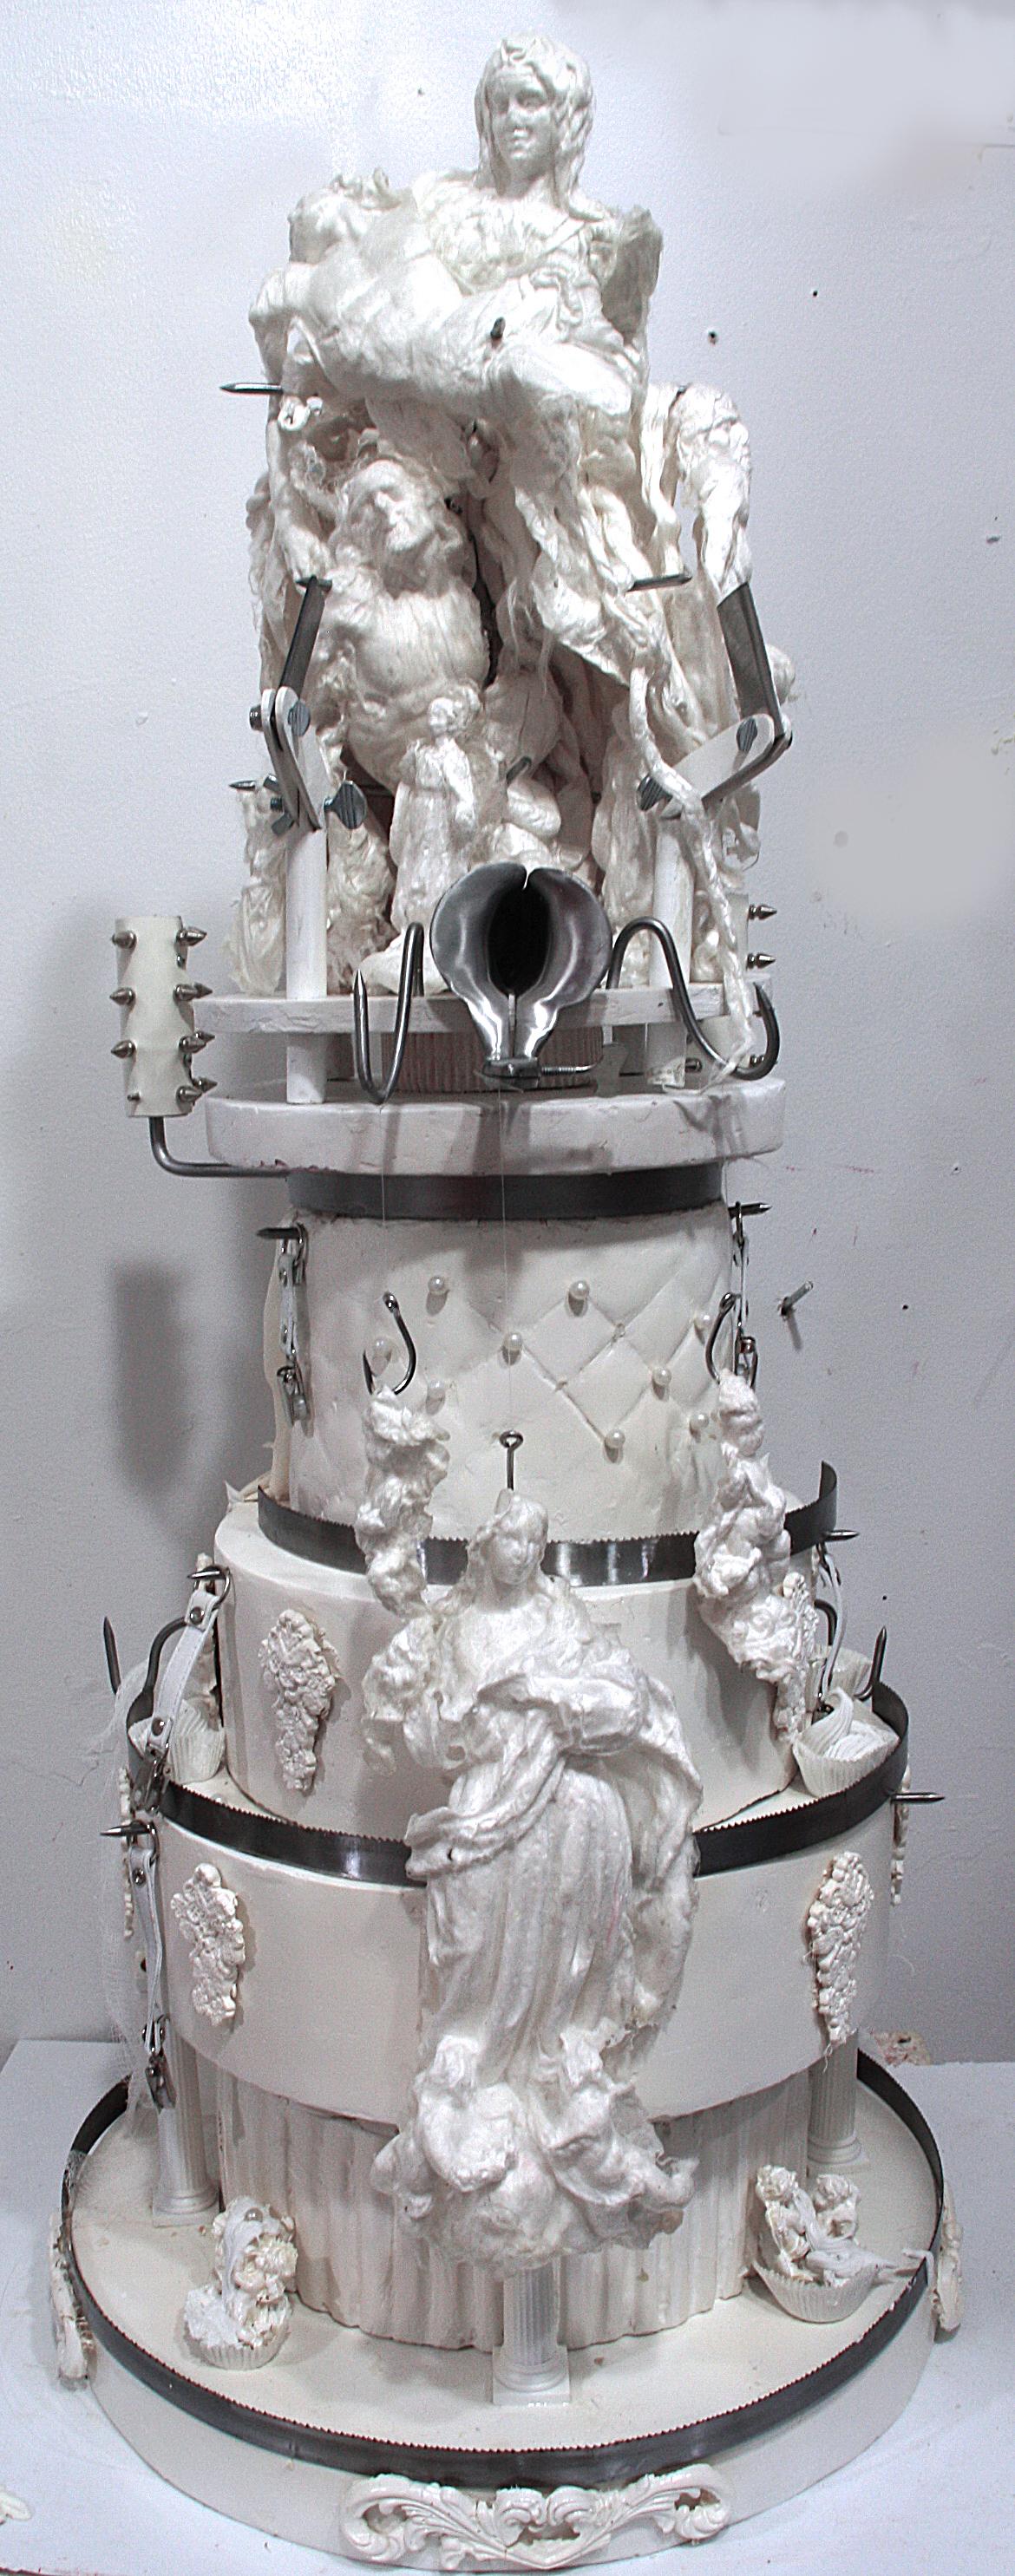 Large sculpture: 'Wedding cake with Pieta topper' - Mixed Media Art by Pablo Garcia-Lopez